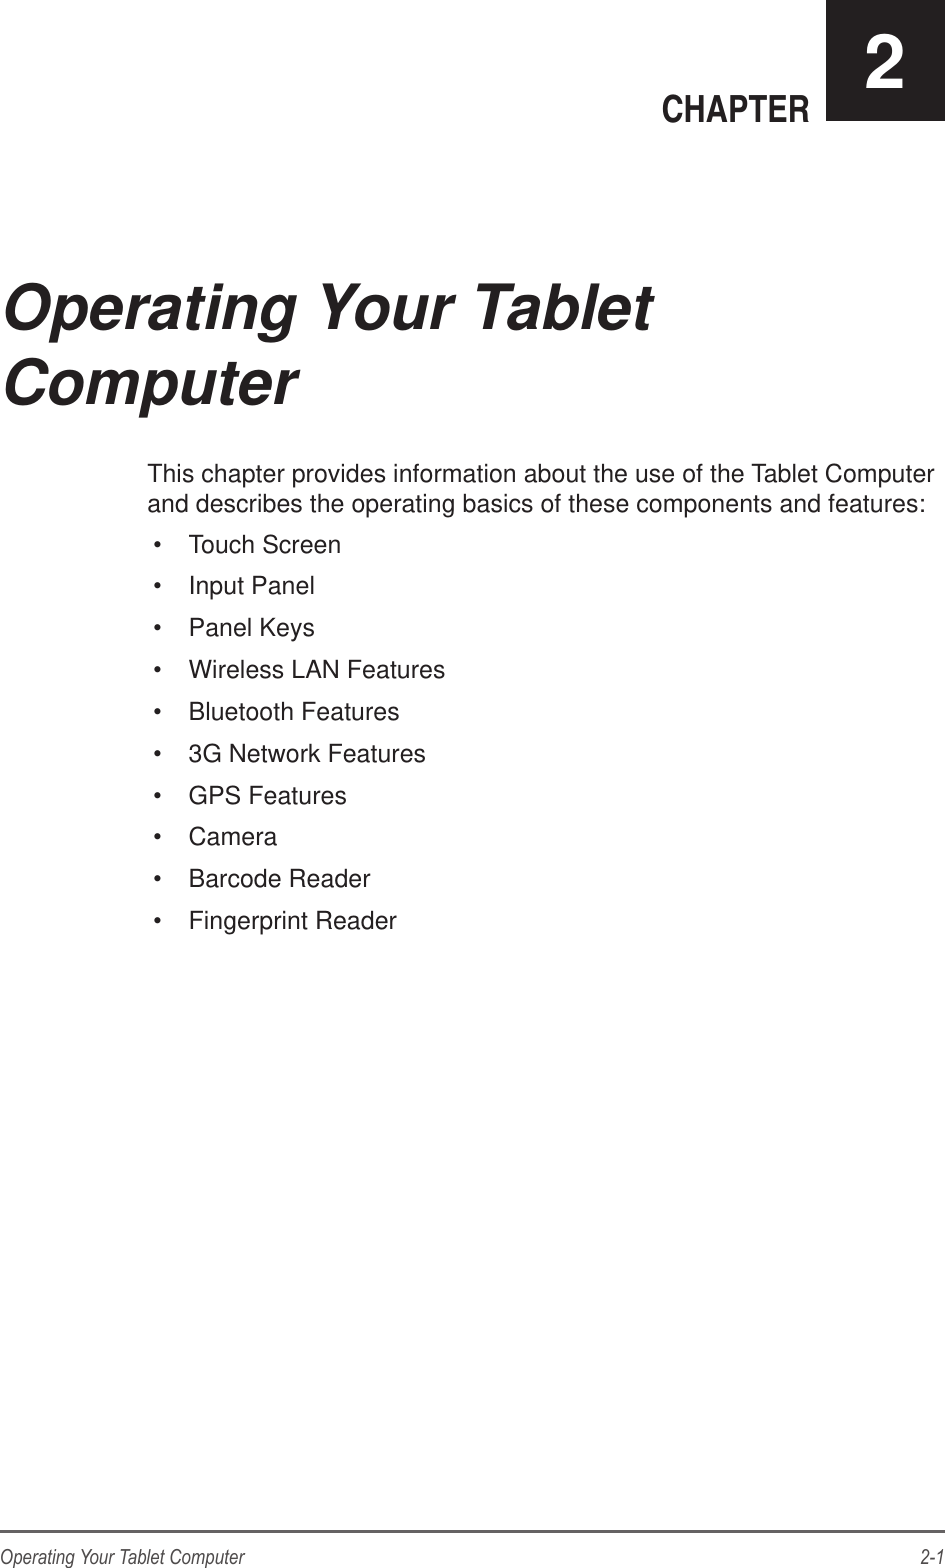 2-1Operating Your Tablet ComputerCHAPTER 2This chapter provides information about the use of the Tablet Computer and describes the operating basics of these components and features: Touch Screen Input Panel Panel Keys Wireless LAN Features Bluetooth Features 3G Network Features GPS Features Camera Barcode Reader Fingerprint ReaderOperating Your Tablet  Computer